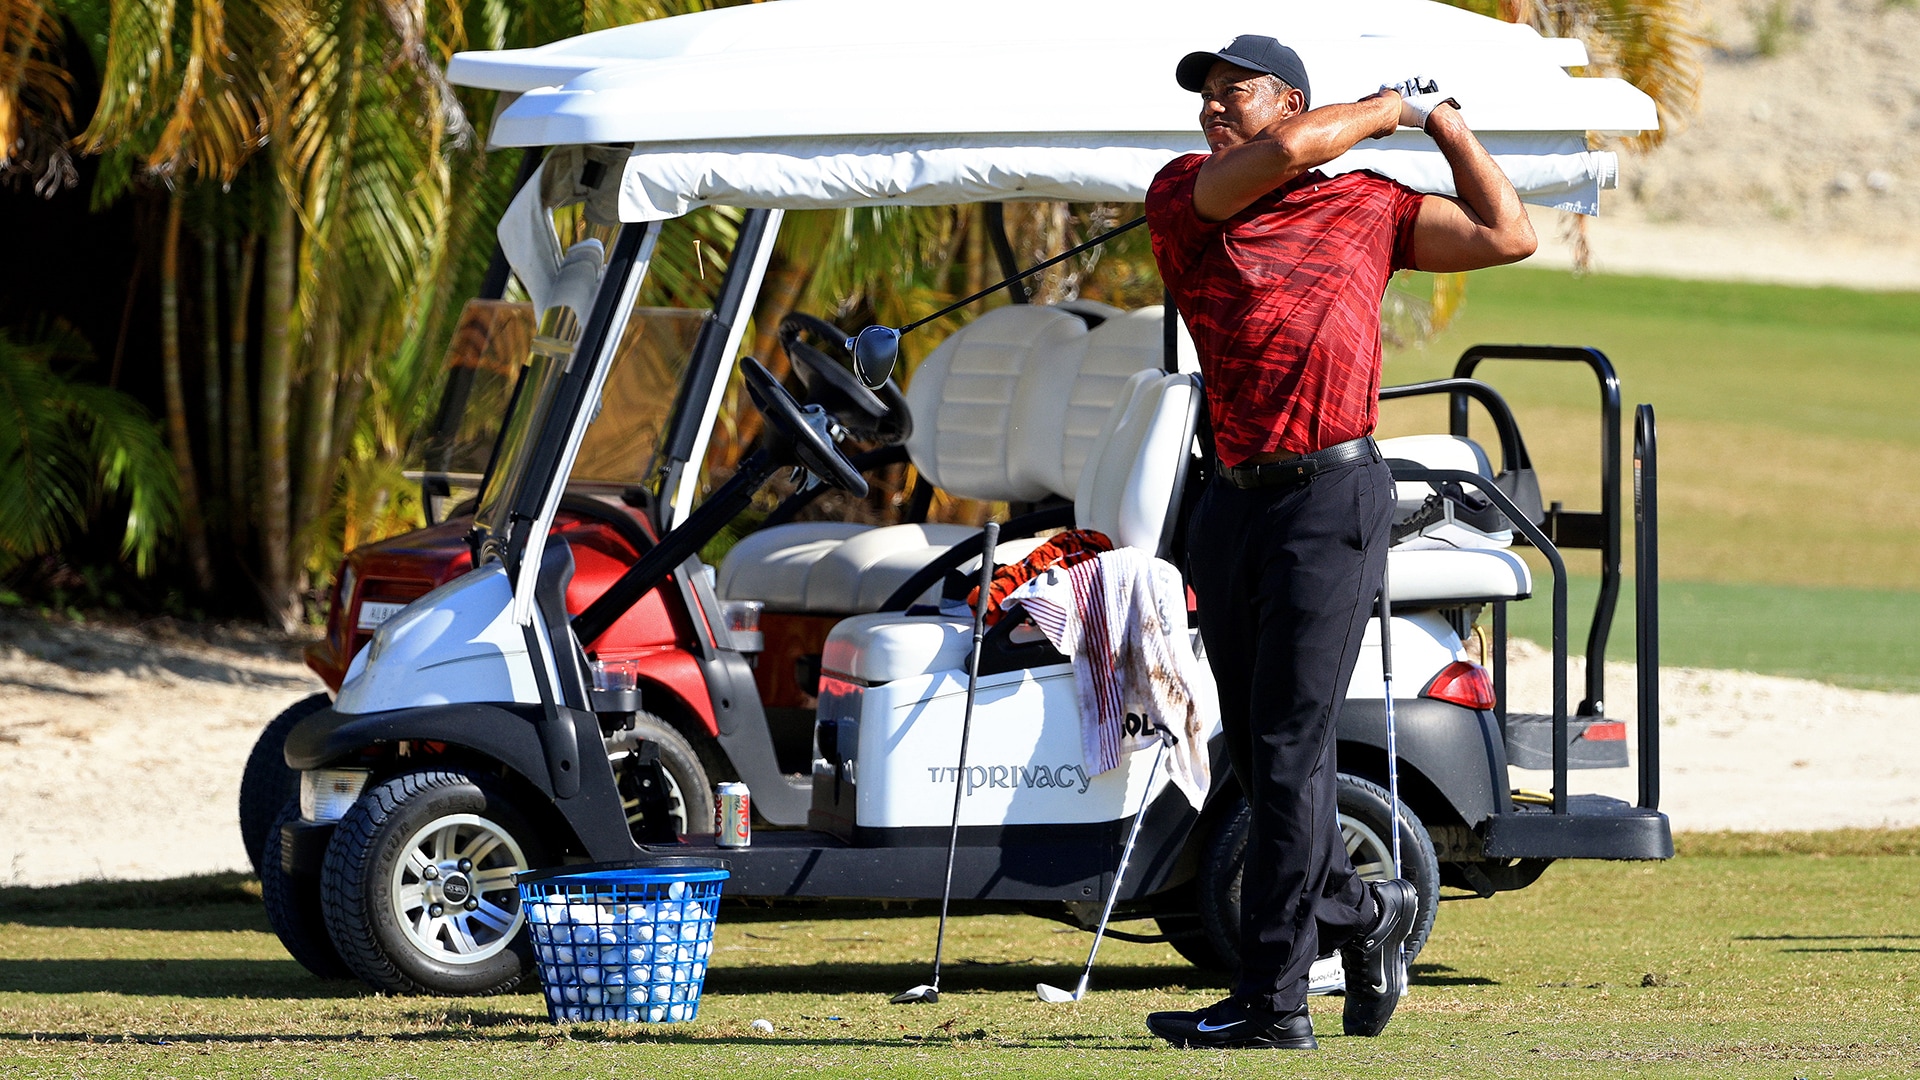 Timeline: A look back at Tiger Woods' return to the 2021 PNC